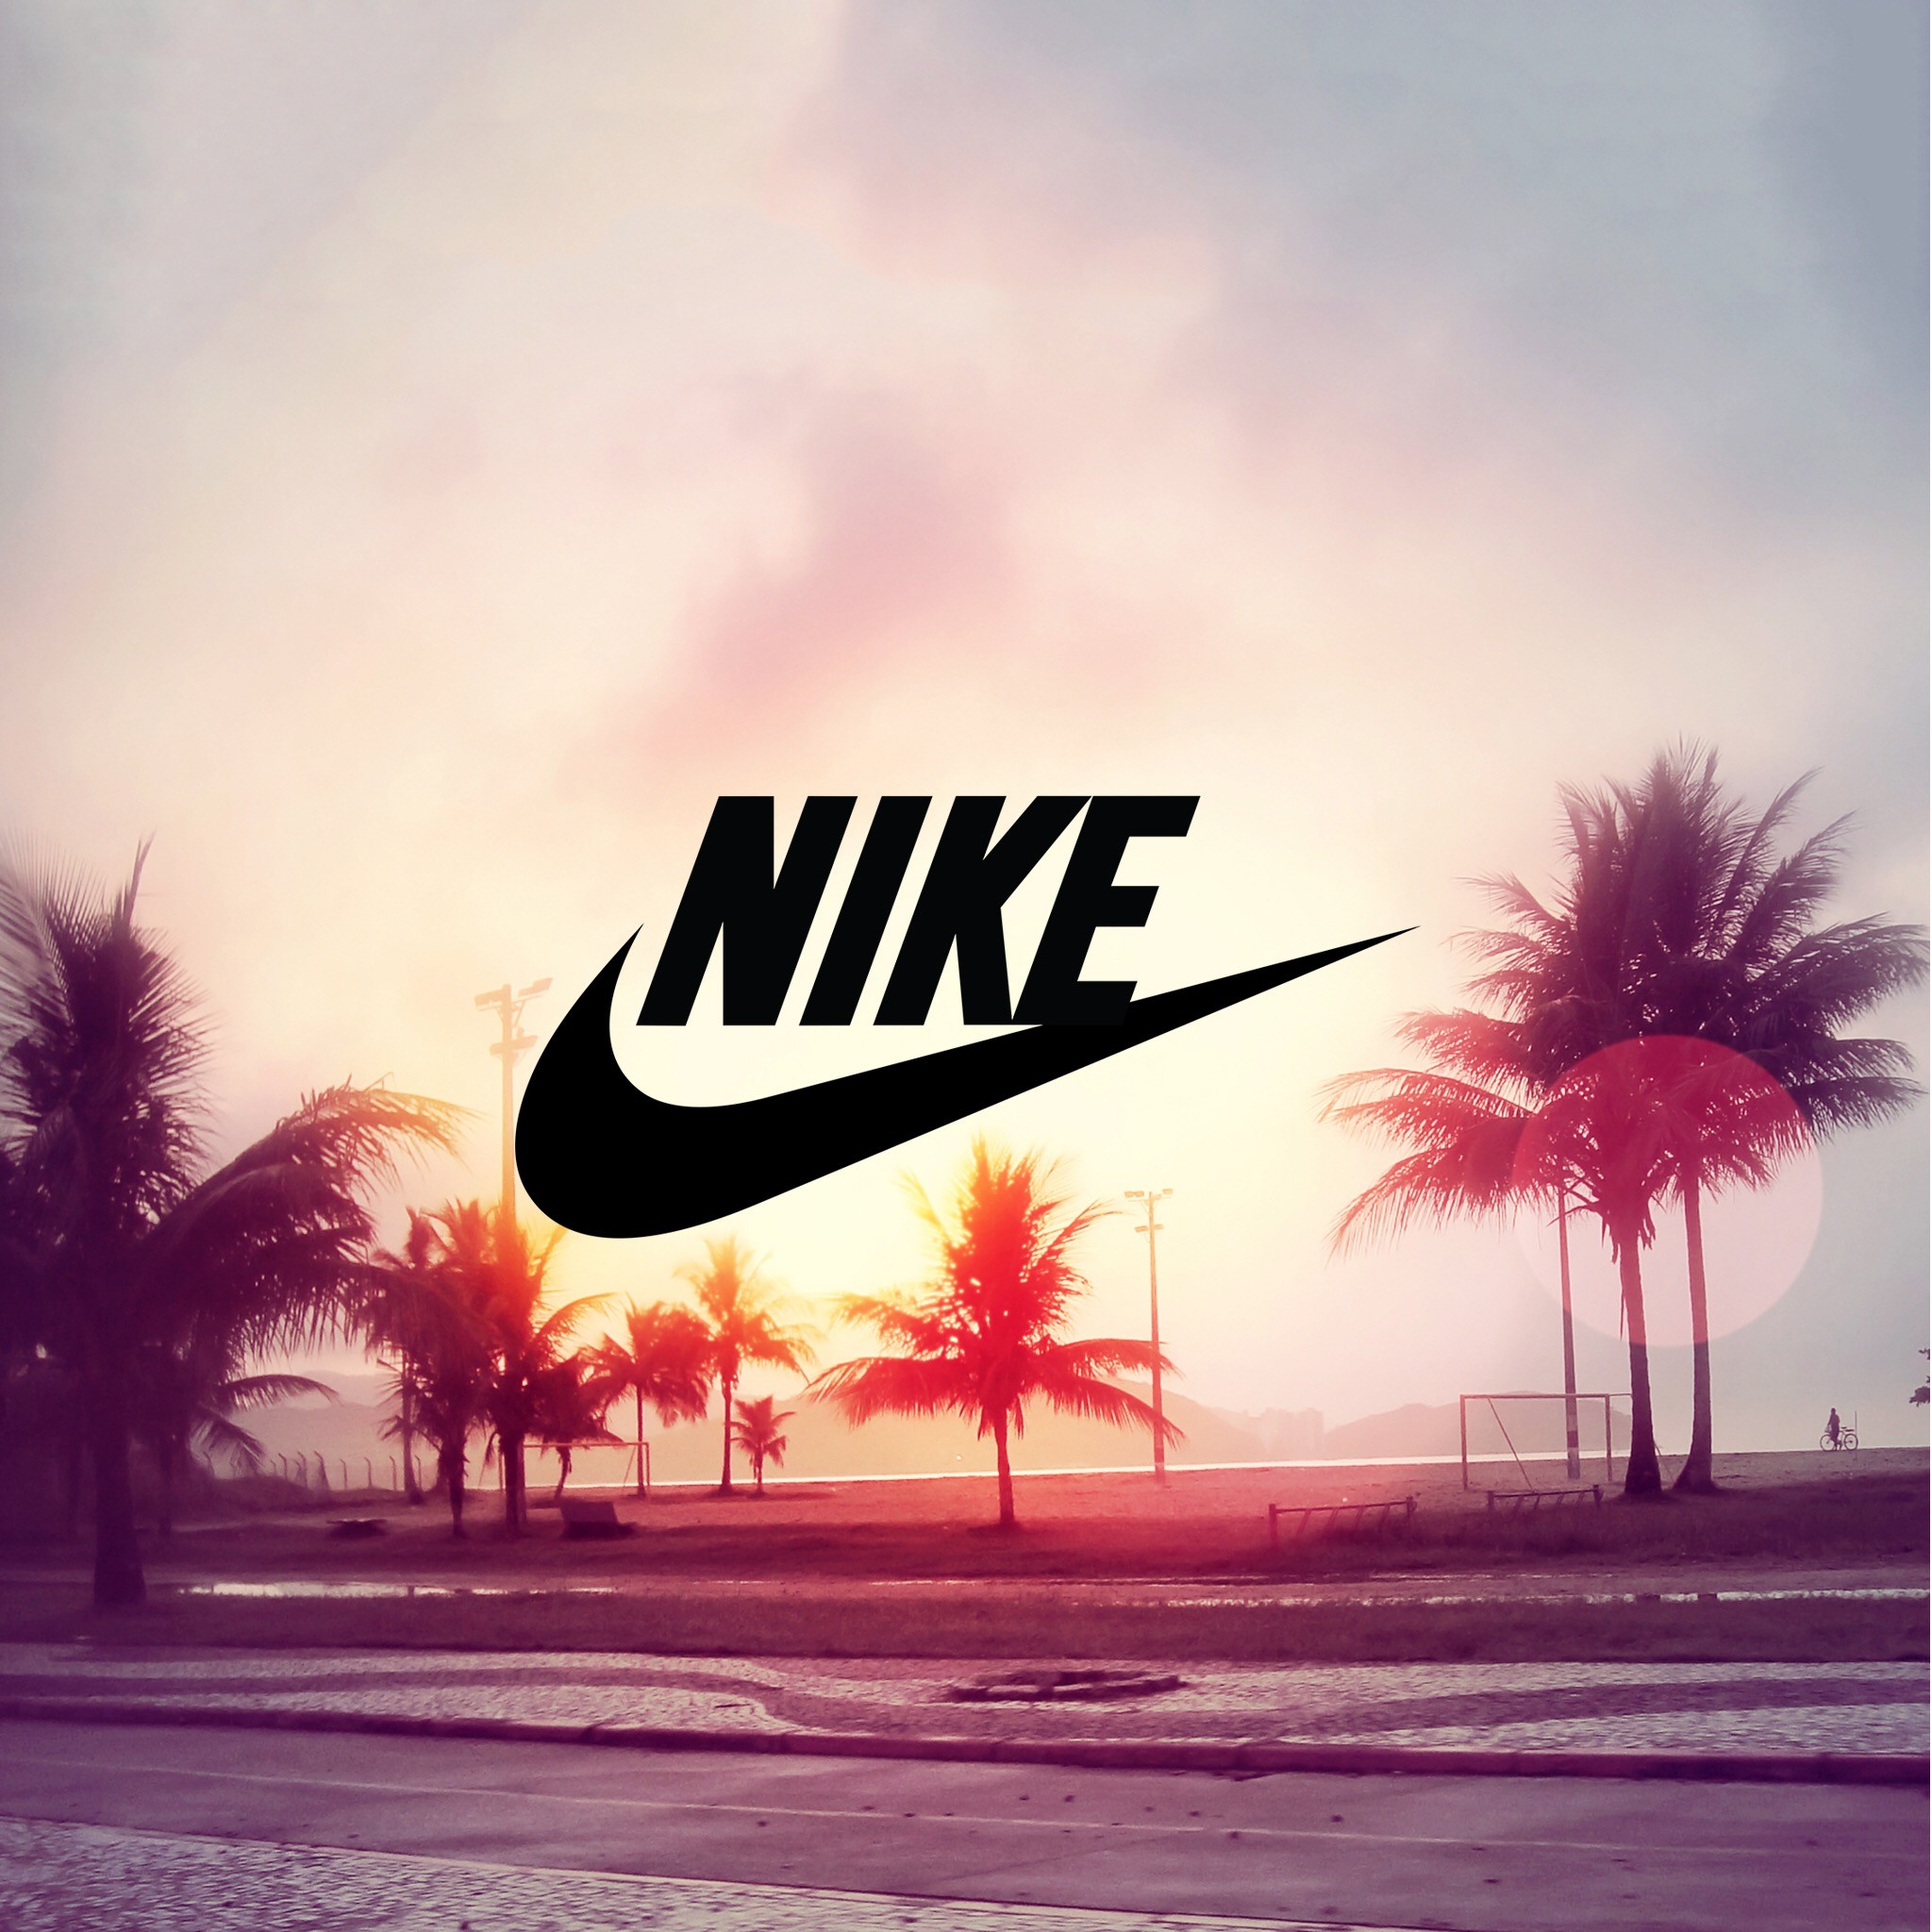 2048x2048 Go places while u still have time... Nike WallpaperNike LogoNike SbIphone  ...